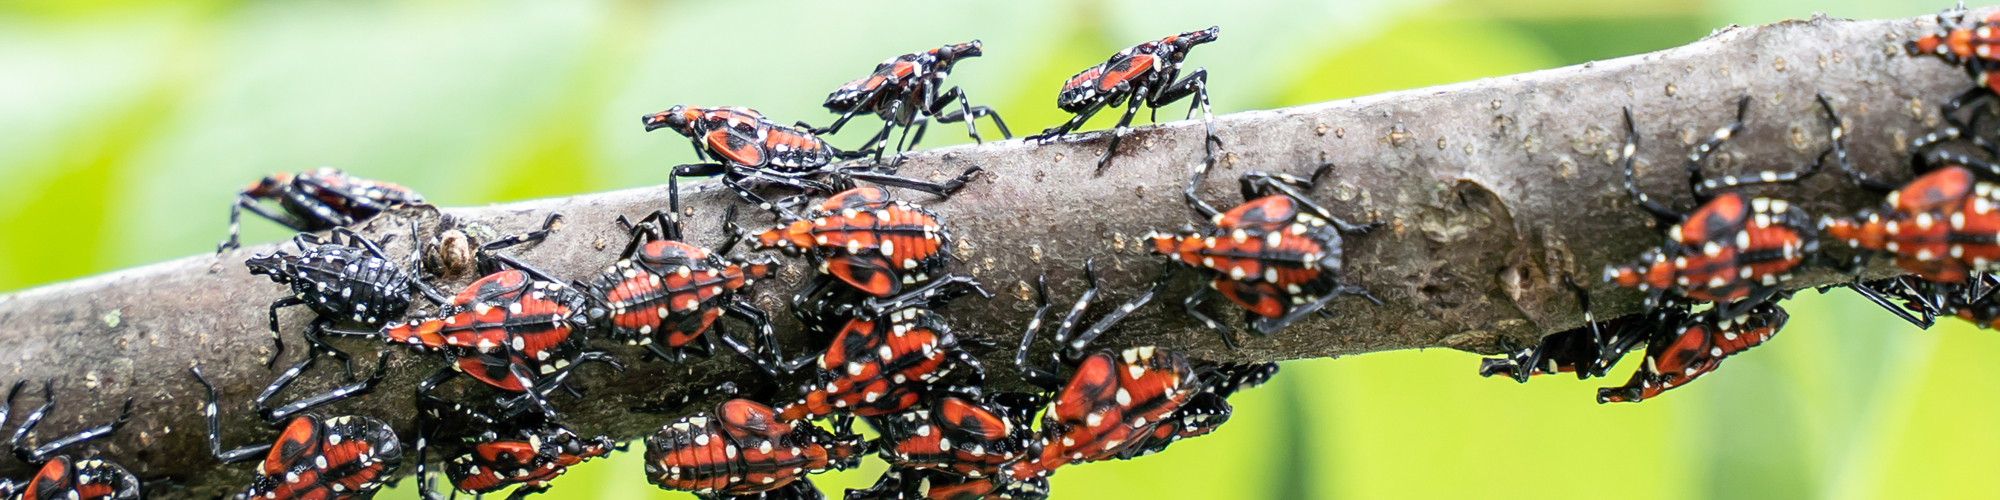 Spotted Lanternflies on a branch